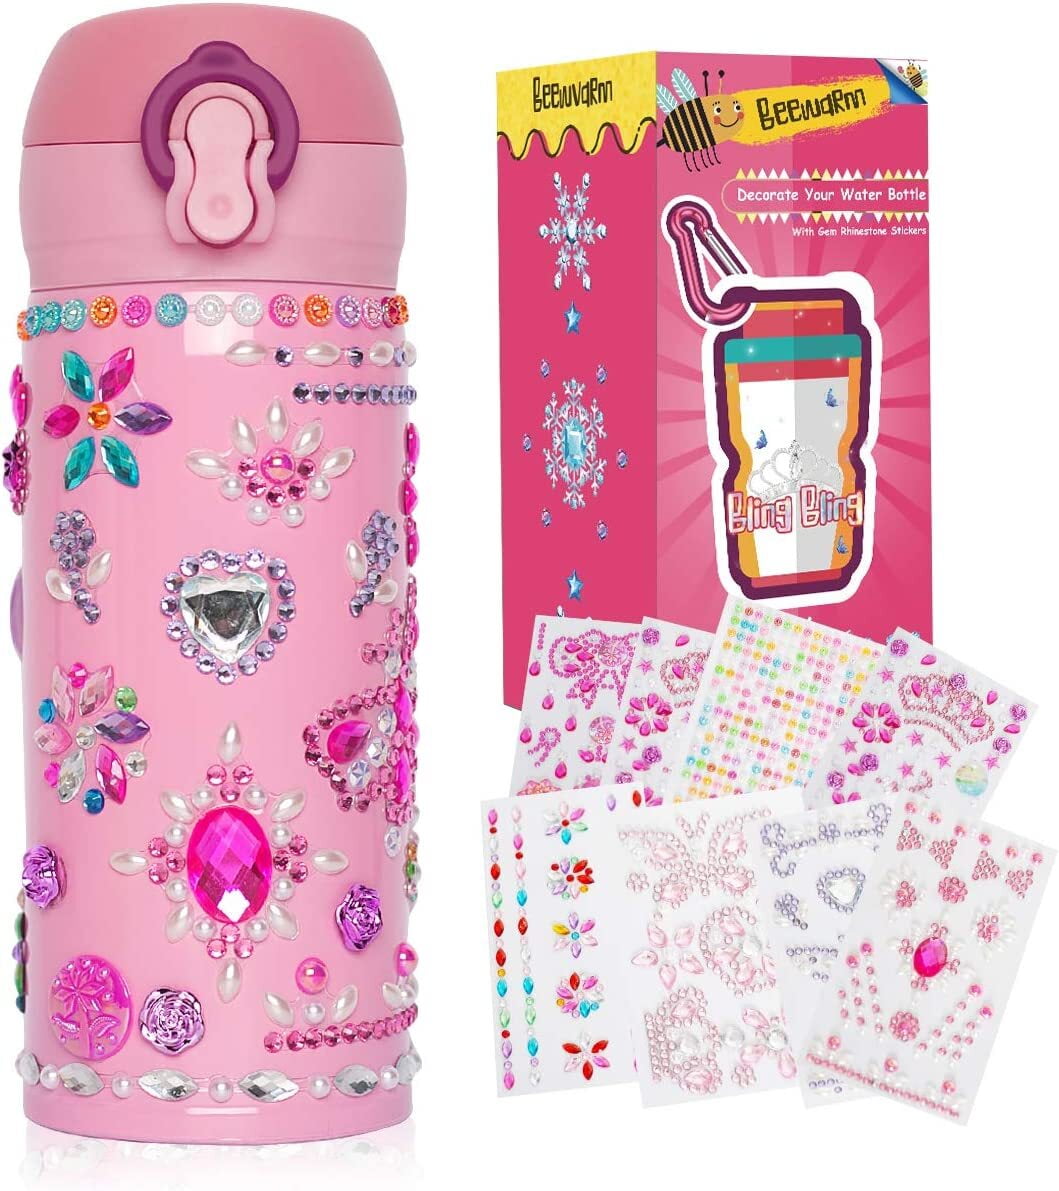 Decorate Your Own Water Bottles With Rhinestone Art Stickers Decal